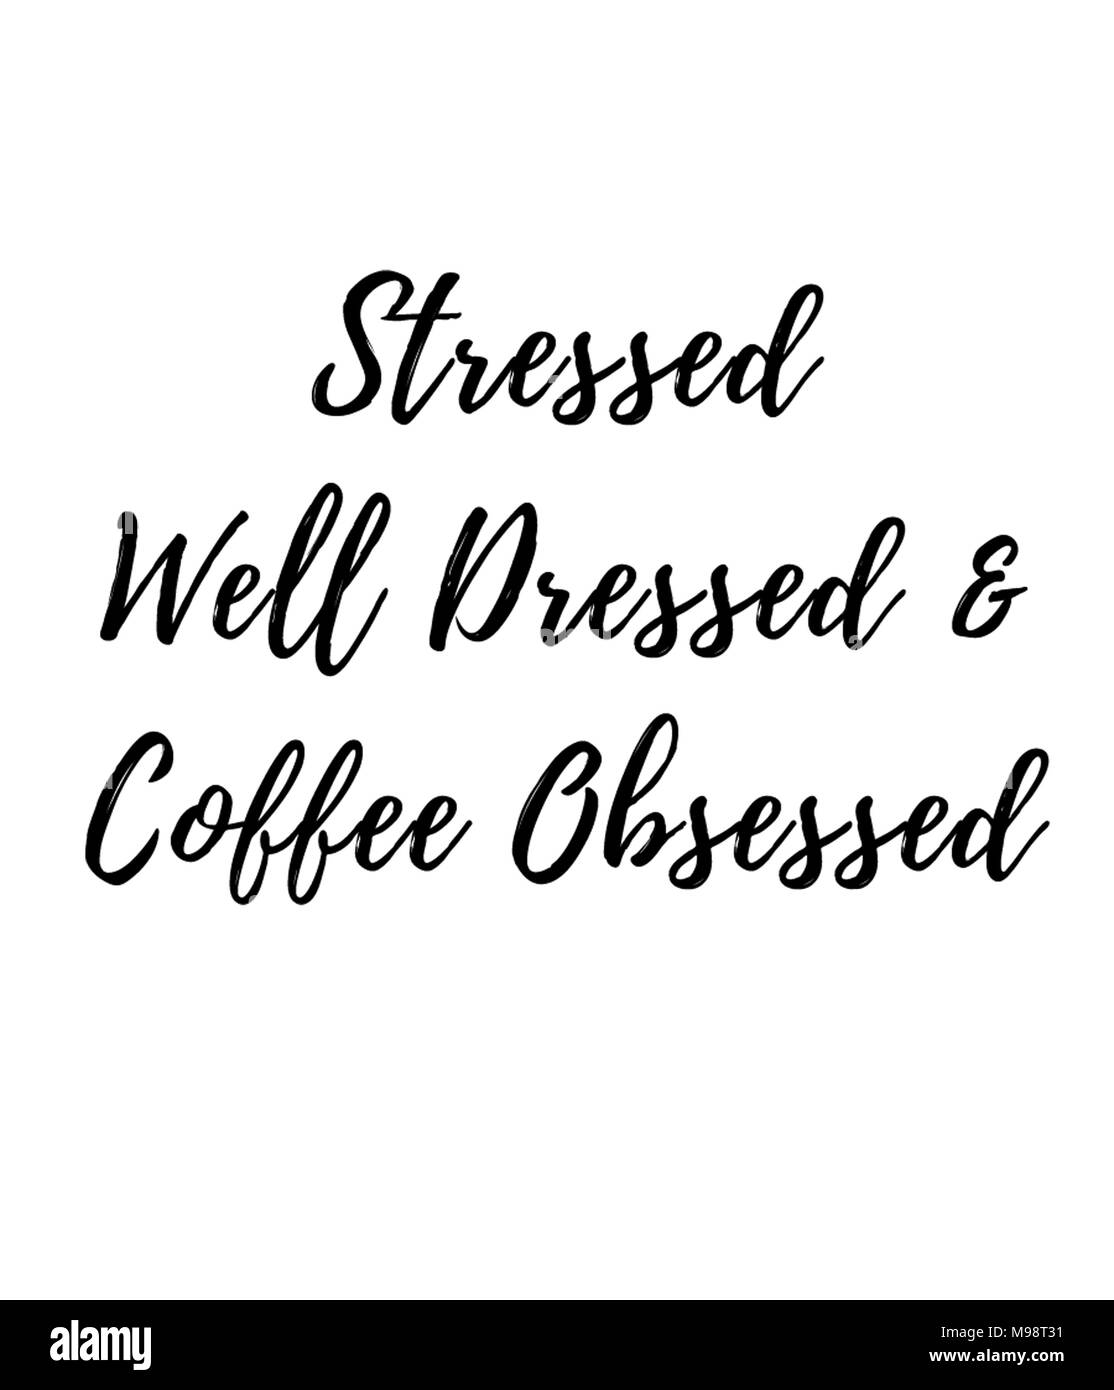 Stressed Well Dressed & Coffee Obsessed Stock Photo